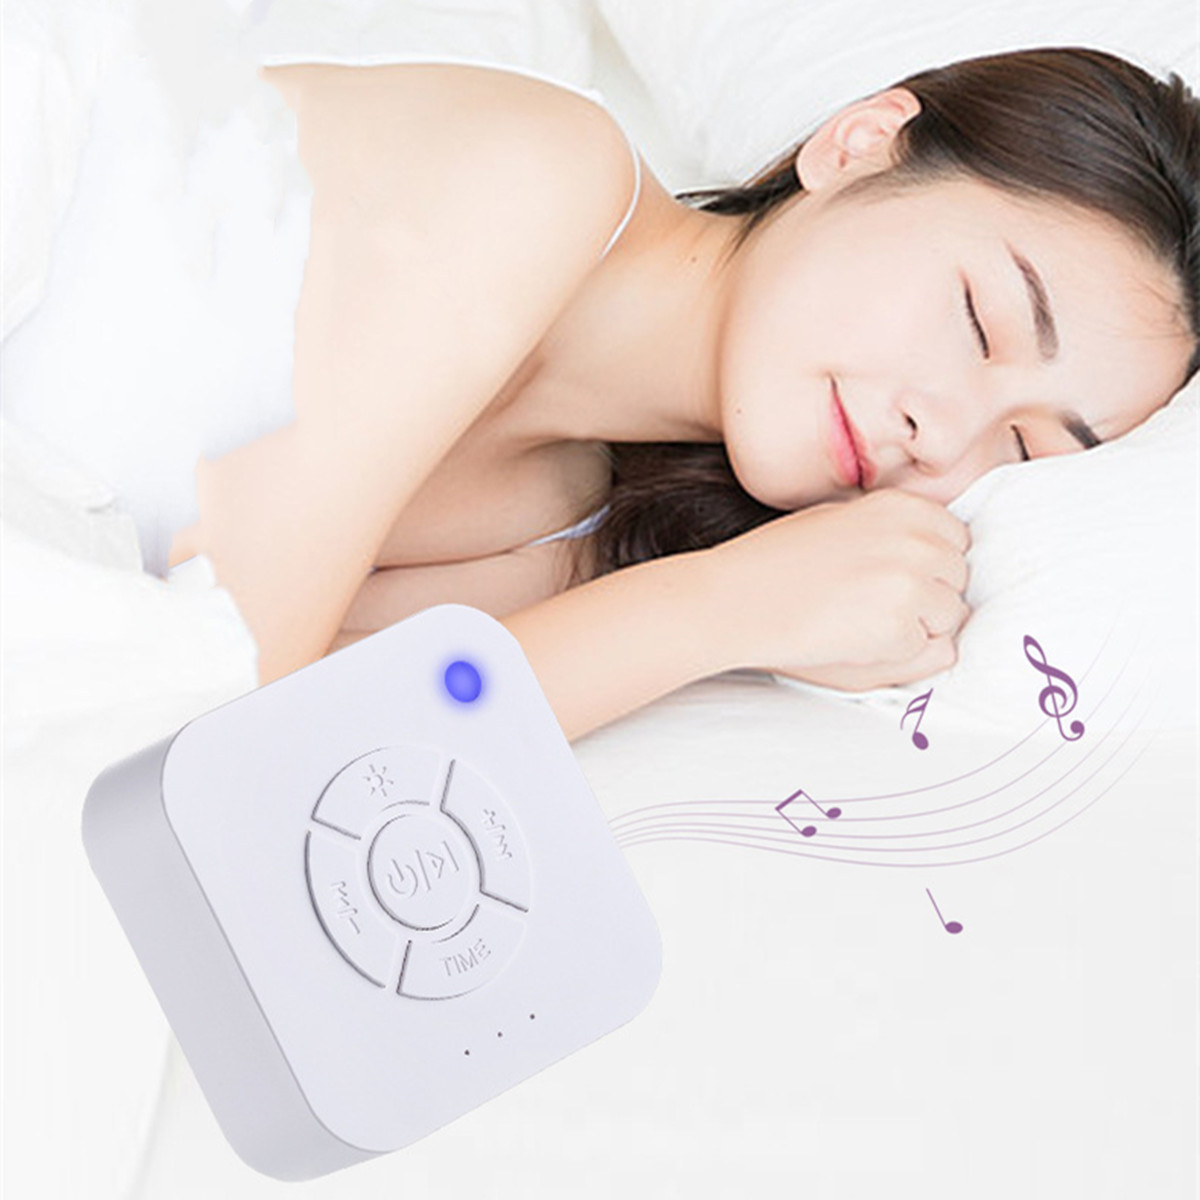 Find White Noise Manchine Sleep Sound Therapy Device Machine Noise Sleep Aid Sounds Easy Sleeping Relax for Sale on Gipsybee.com with cryptocurrencies